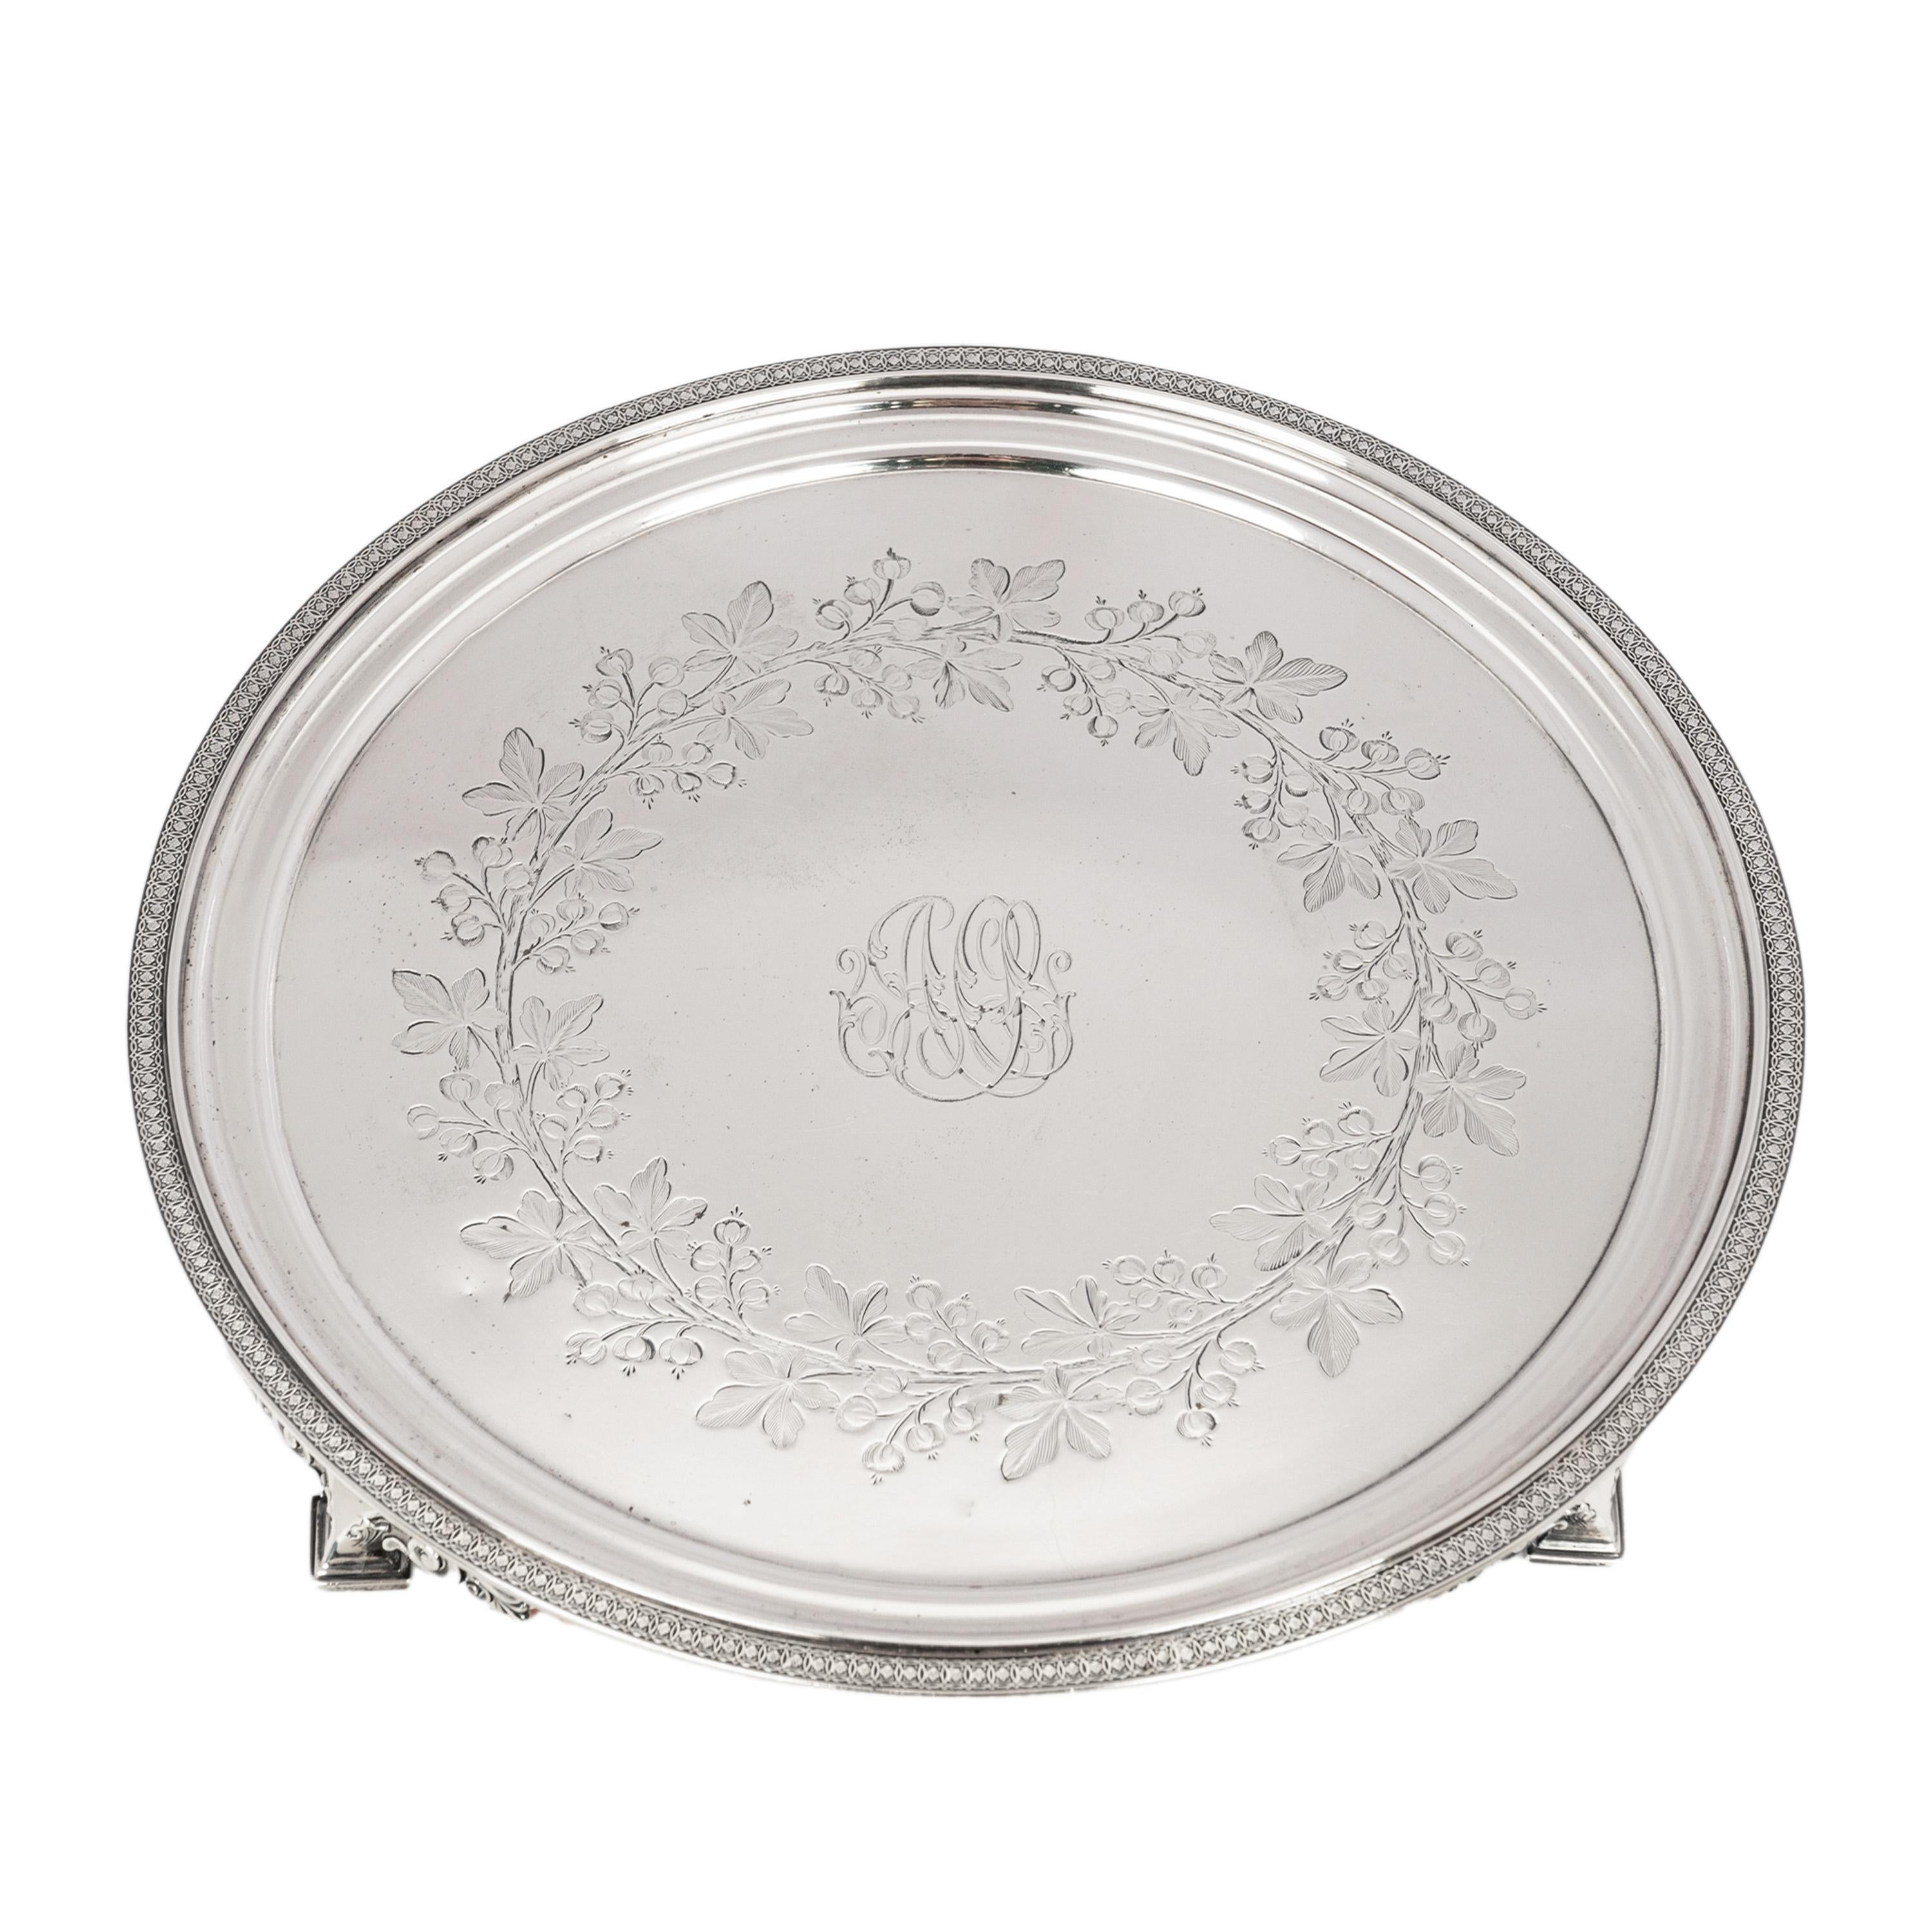 Antique Engraved Sterling Silver Tiffany & Co Footed Salver Tray New York 1870 For Sale 7